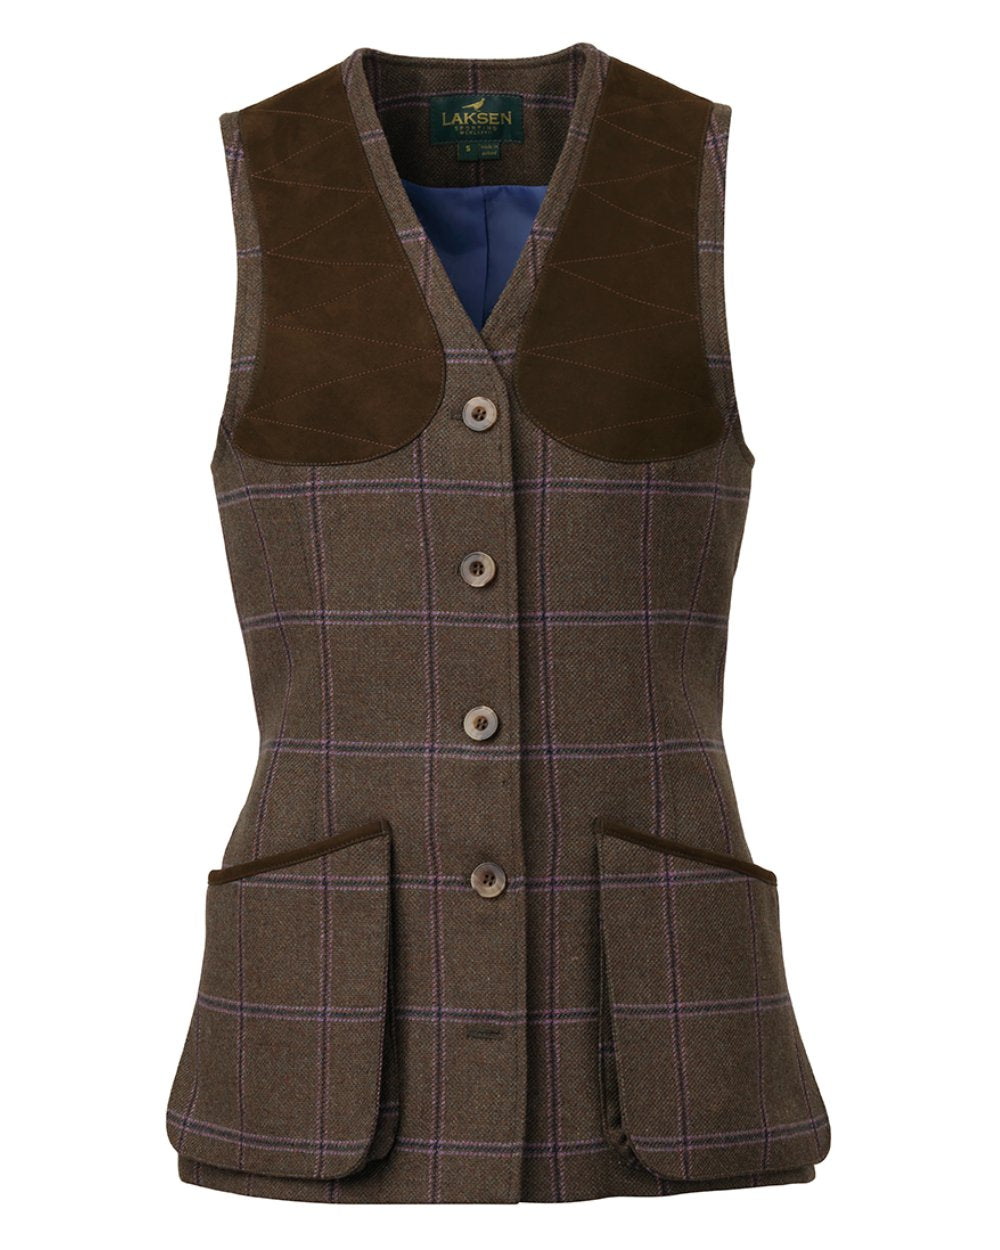 Laksen Pippa Beauly Tweed Shooting Vest On A White Background